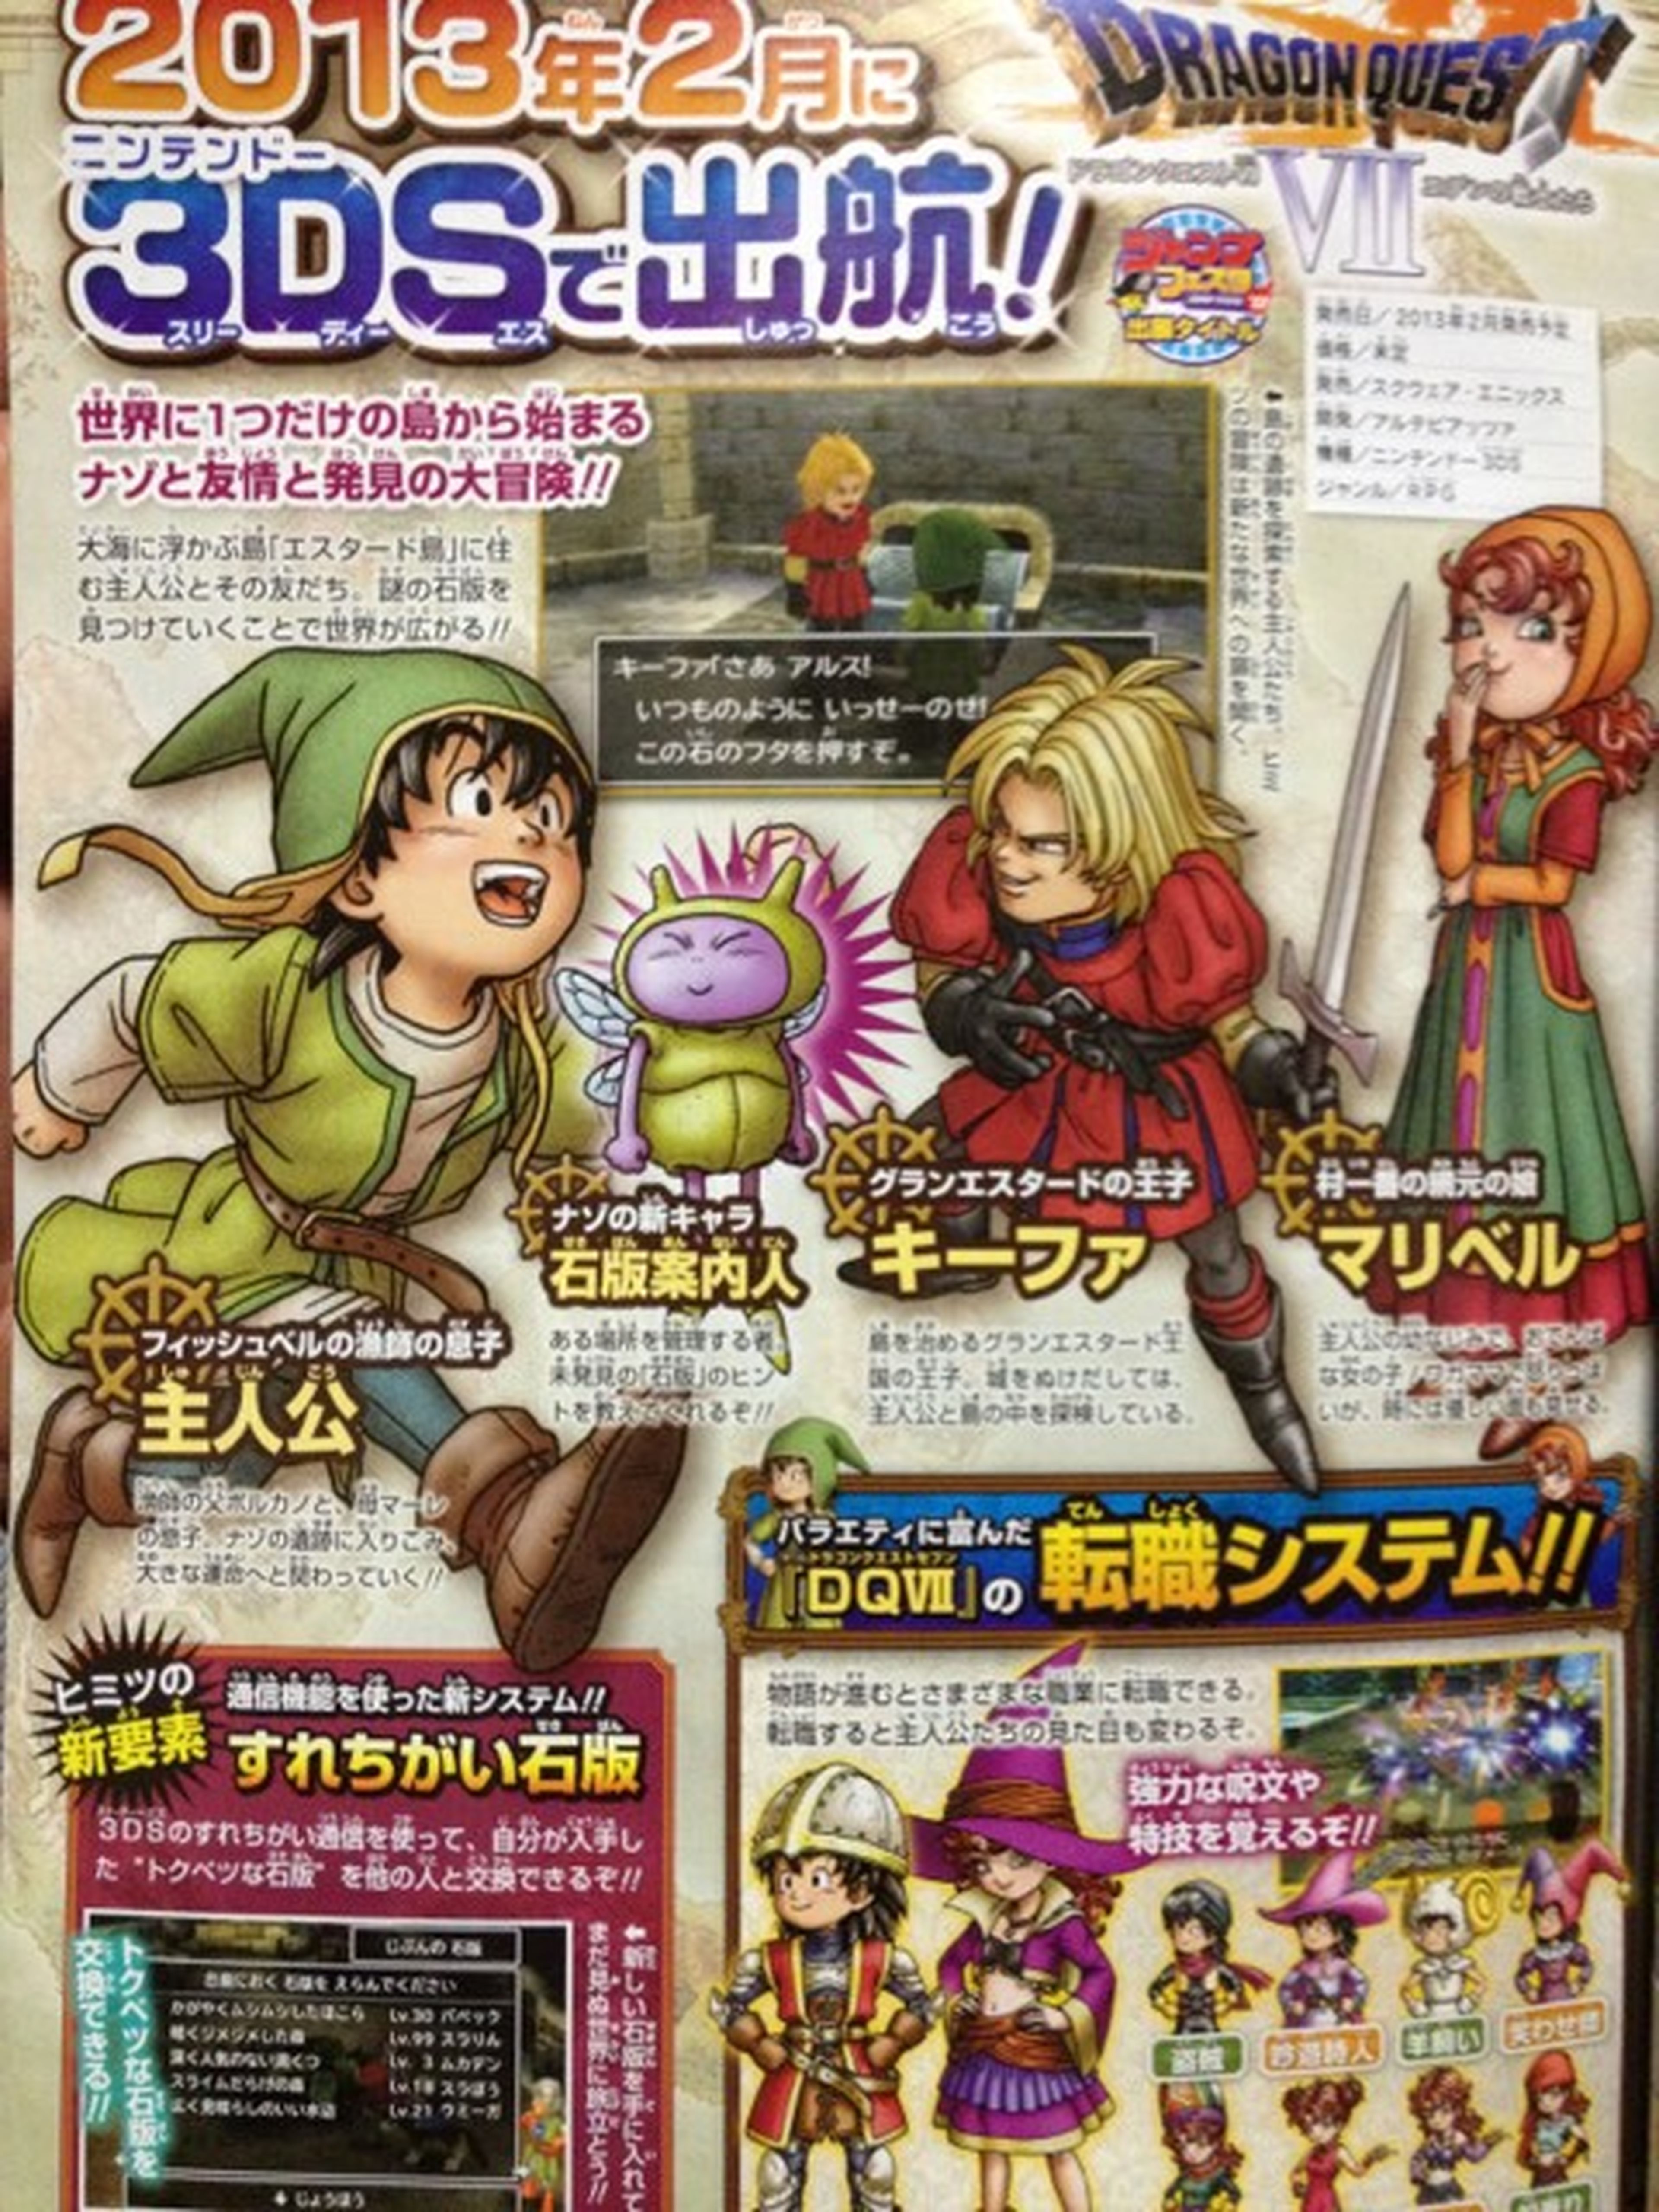 Dragon Quest 7, rumbo a 3DS